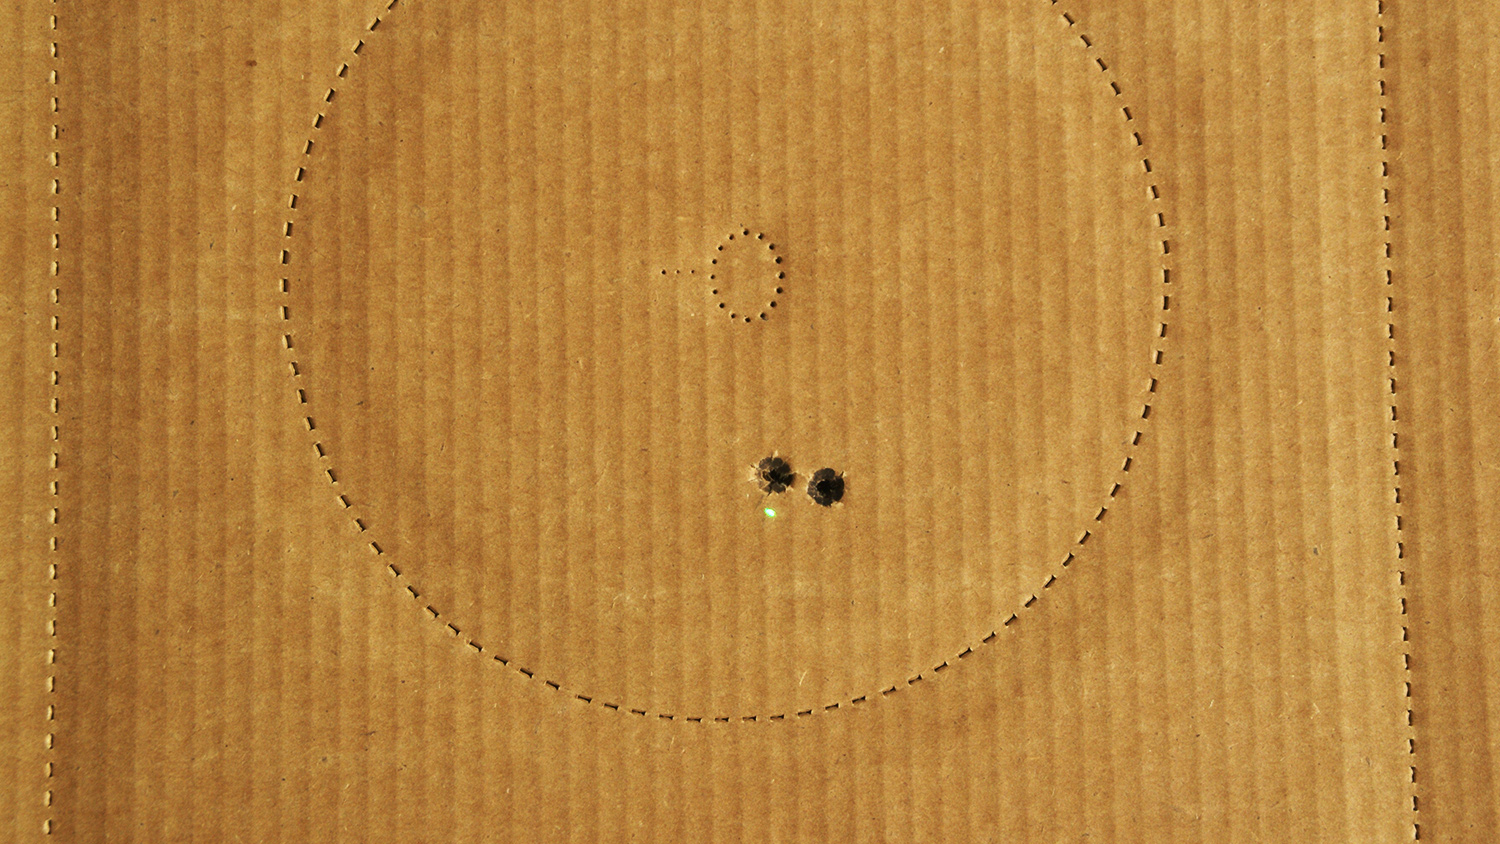 Laser dot used in IDPA competition